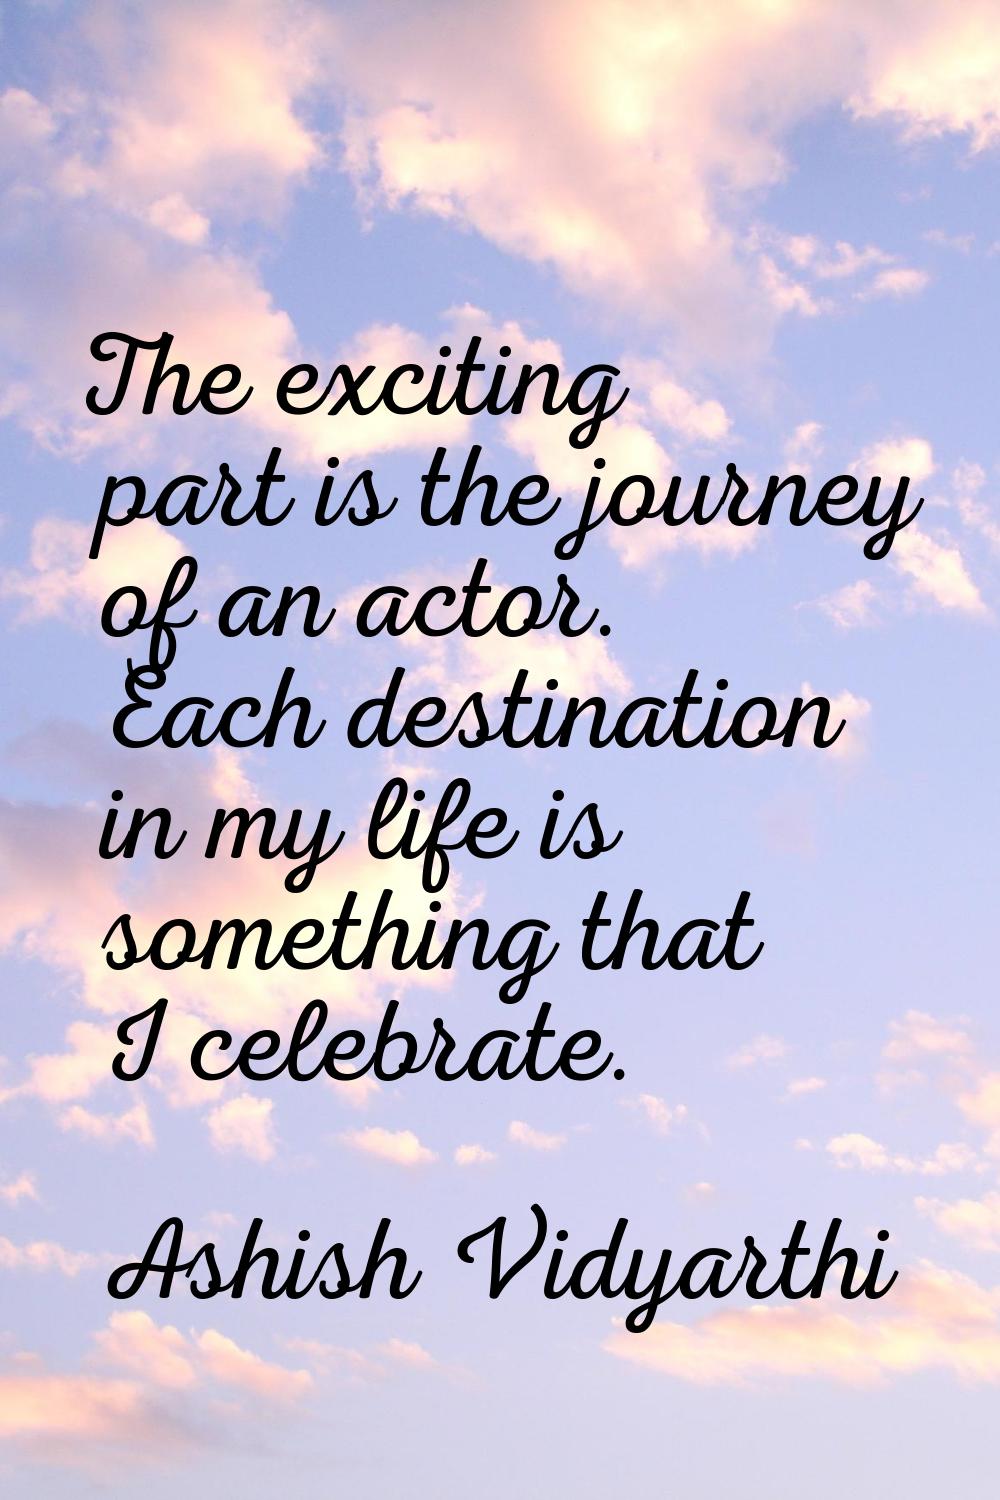 The exciting part is the journey of an actor. Each destination in my life is something that I celeb